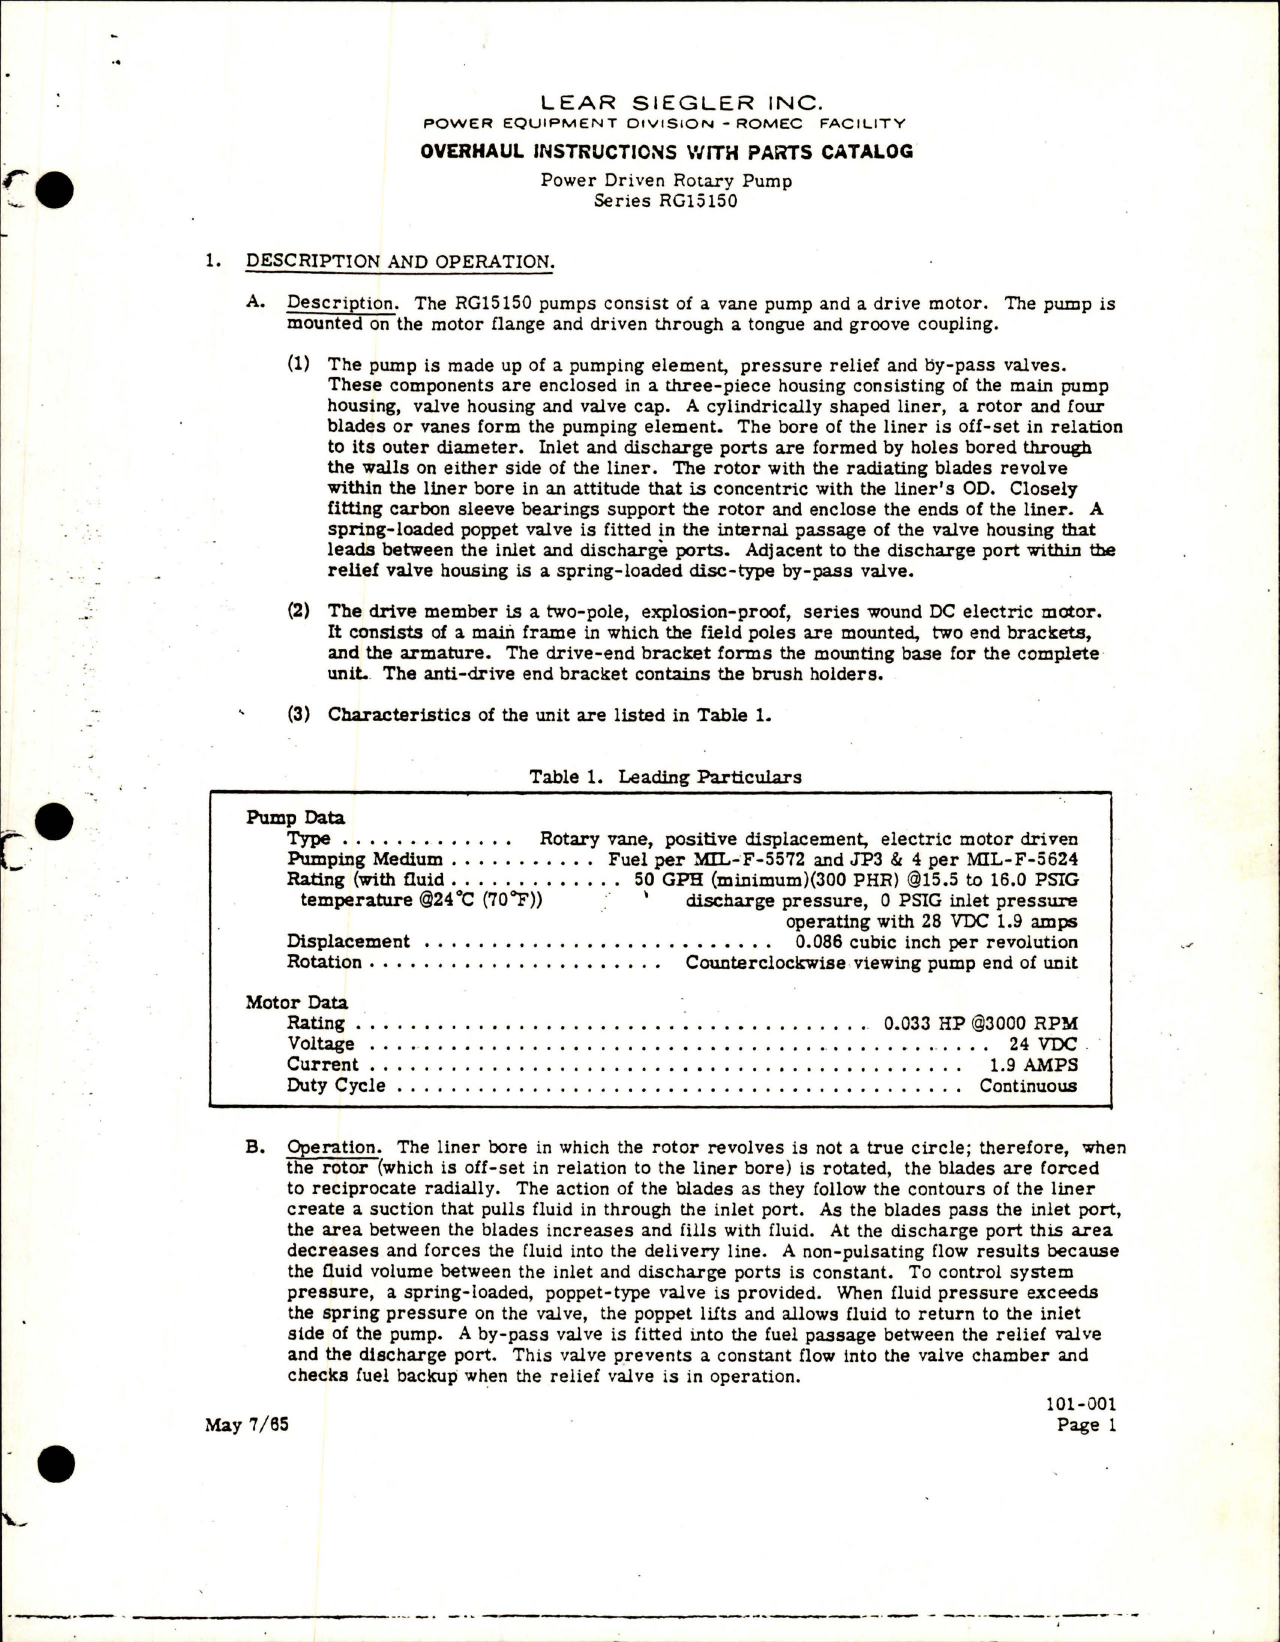 Sample page 7 from AirCorps Library document: Overhaul Instructions with Parts Catalog for Power Driven Rotary Fuel Transfer Pump - Model RG15150 